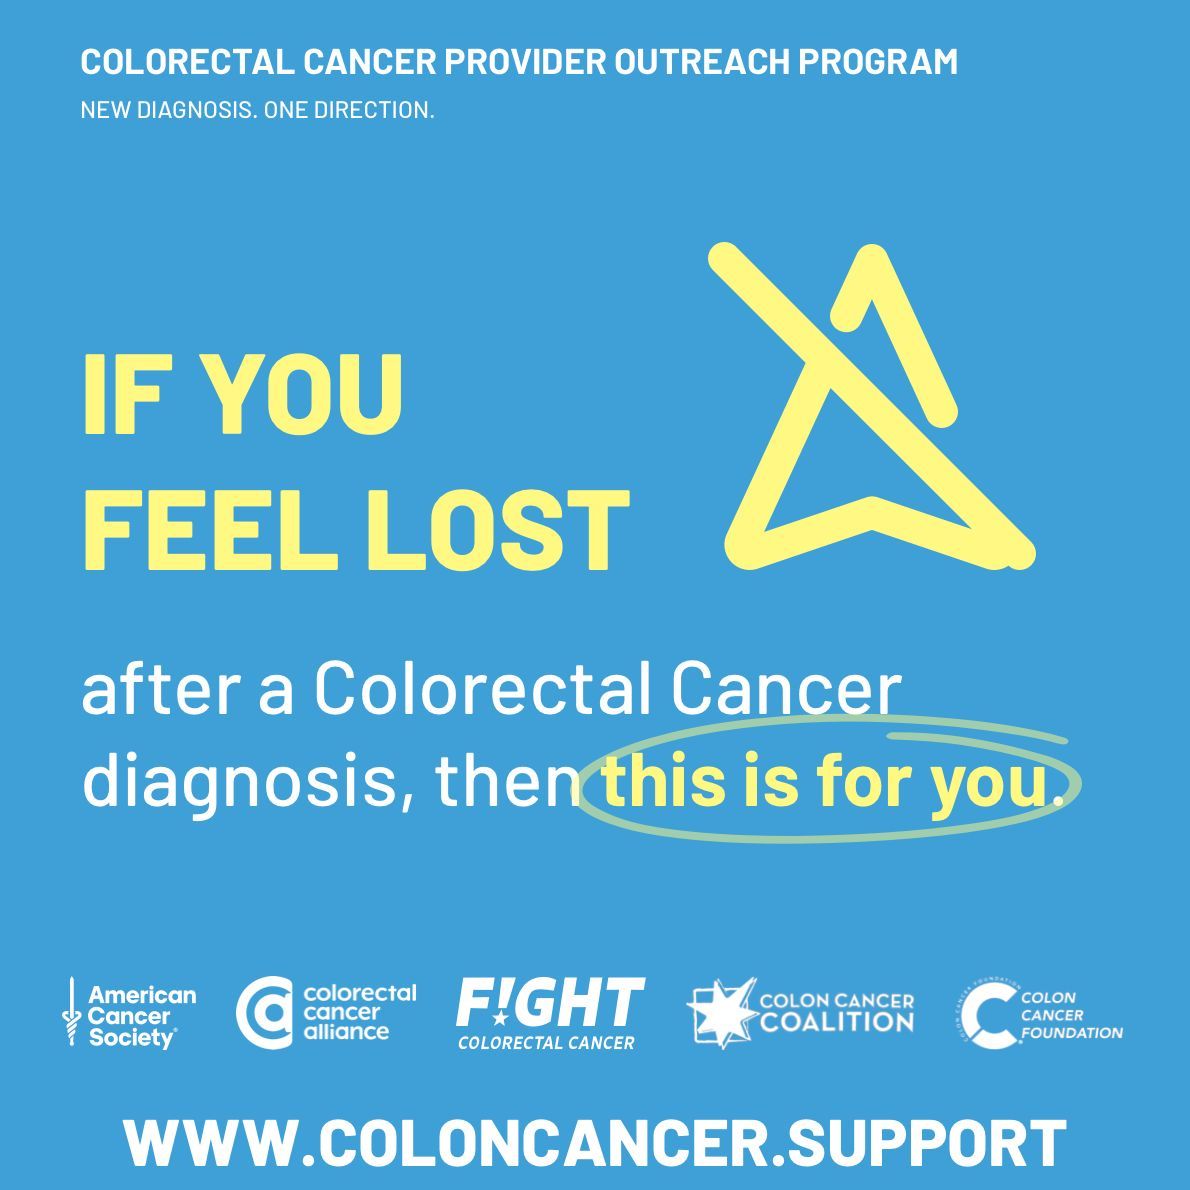 Every journey begins with a step. Take the first step towards colorectal cancer awareness today. 👣 

💙 Visit colorectalcancer.support 💙 

#ColorectalCancer #CRC #ColonCancer #ScreeningsSaveLives #CancerAwareness #BlueForCRC #NeverTooYoung #FightCRC #ColonCancerAwareness